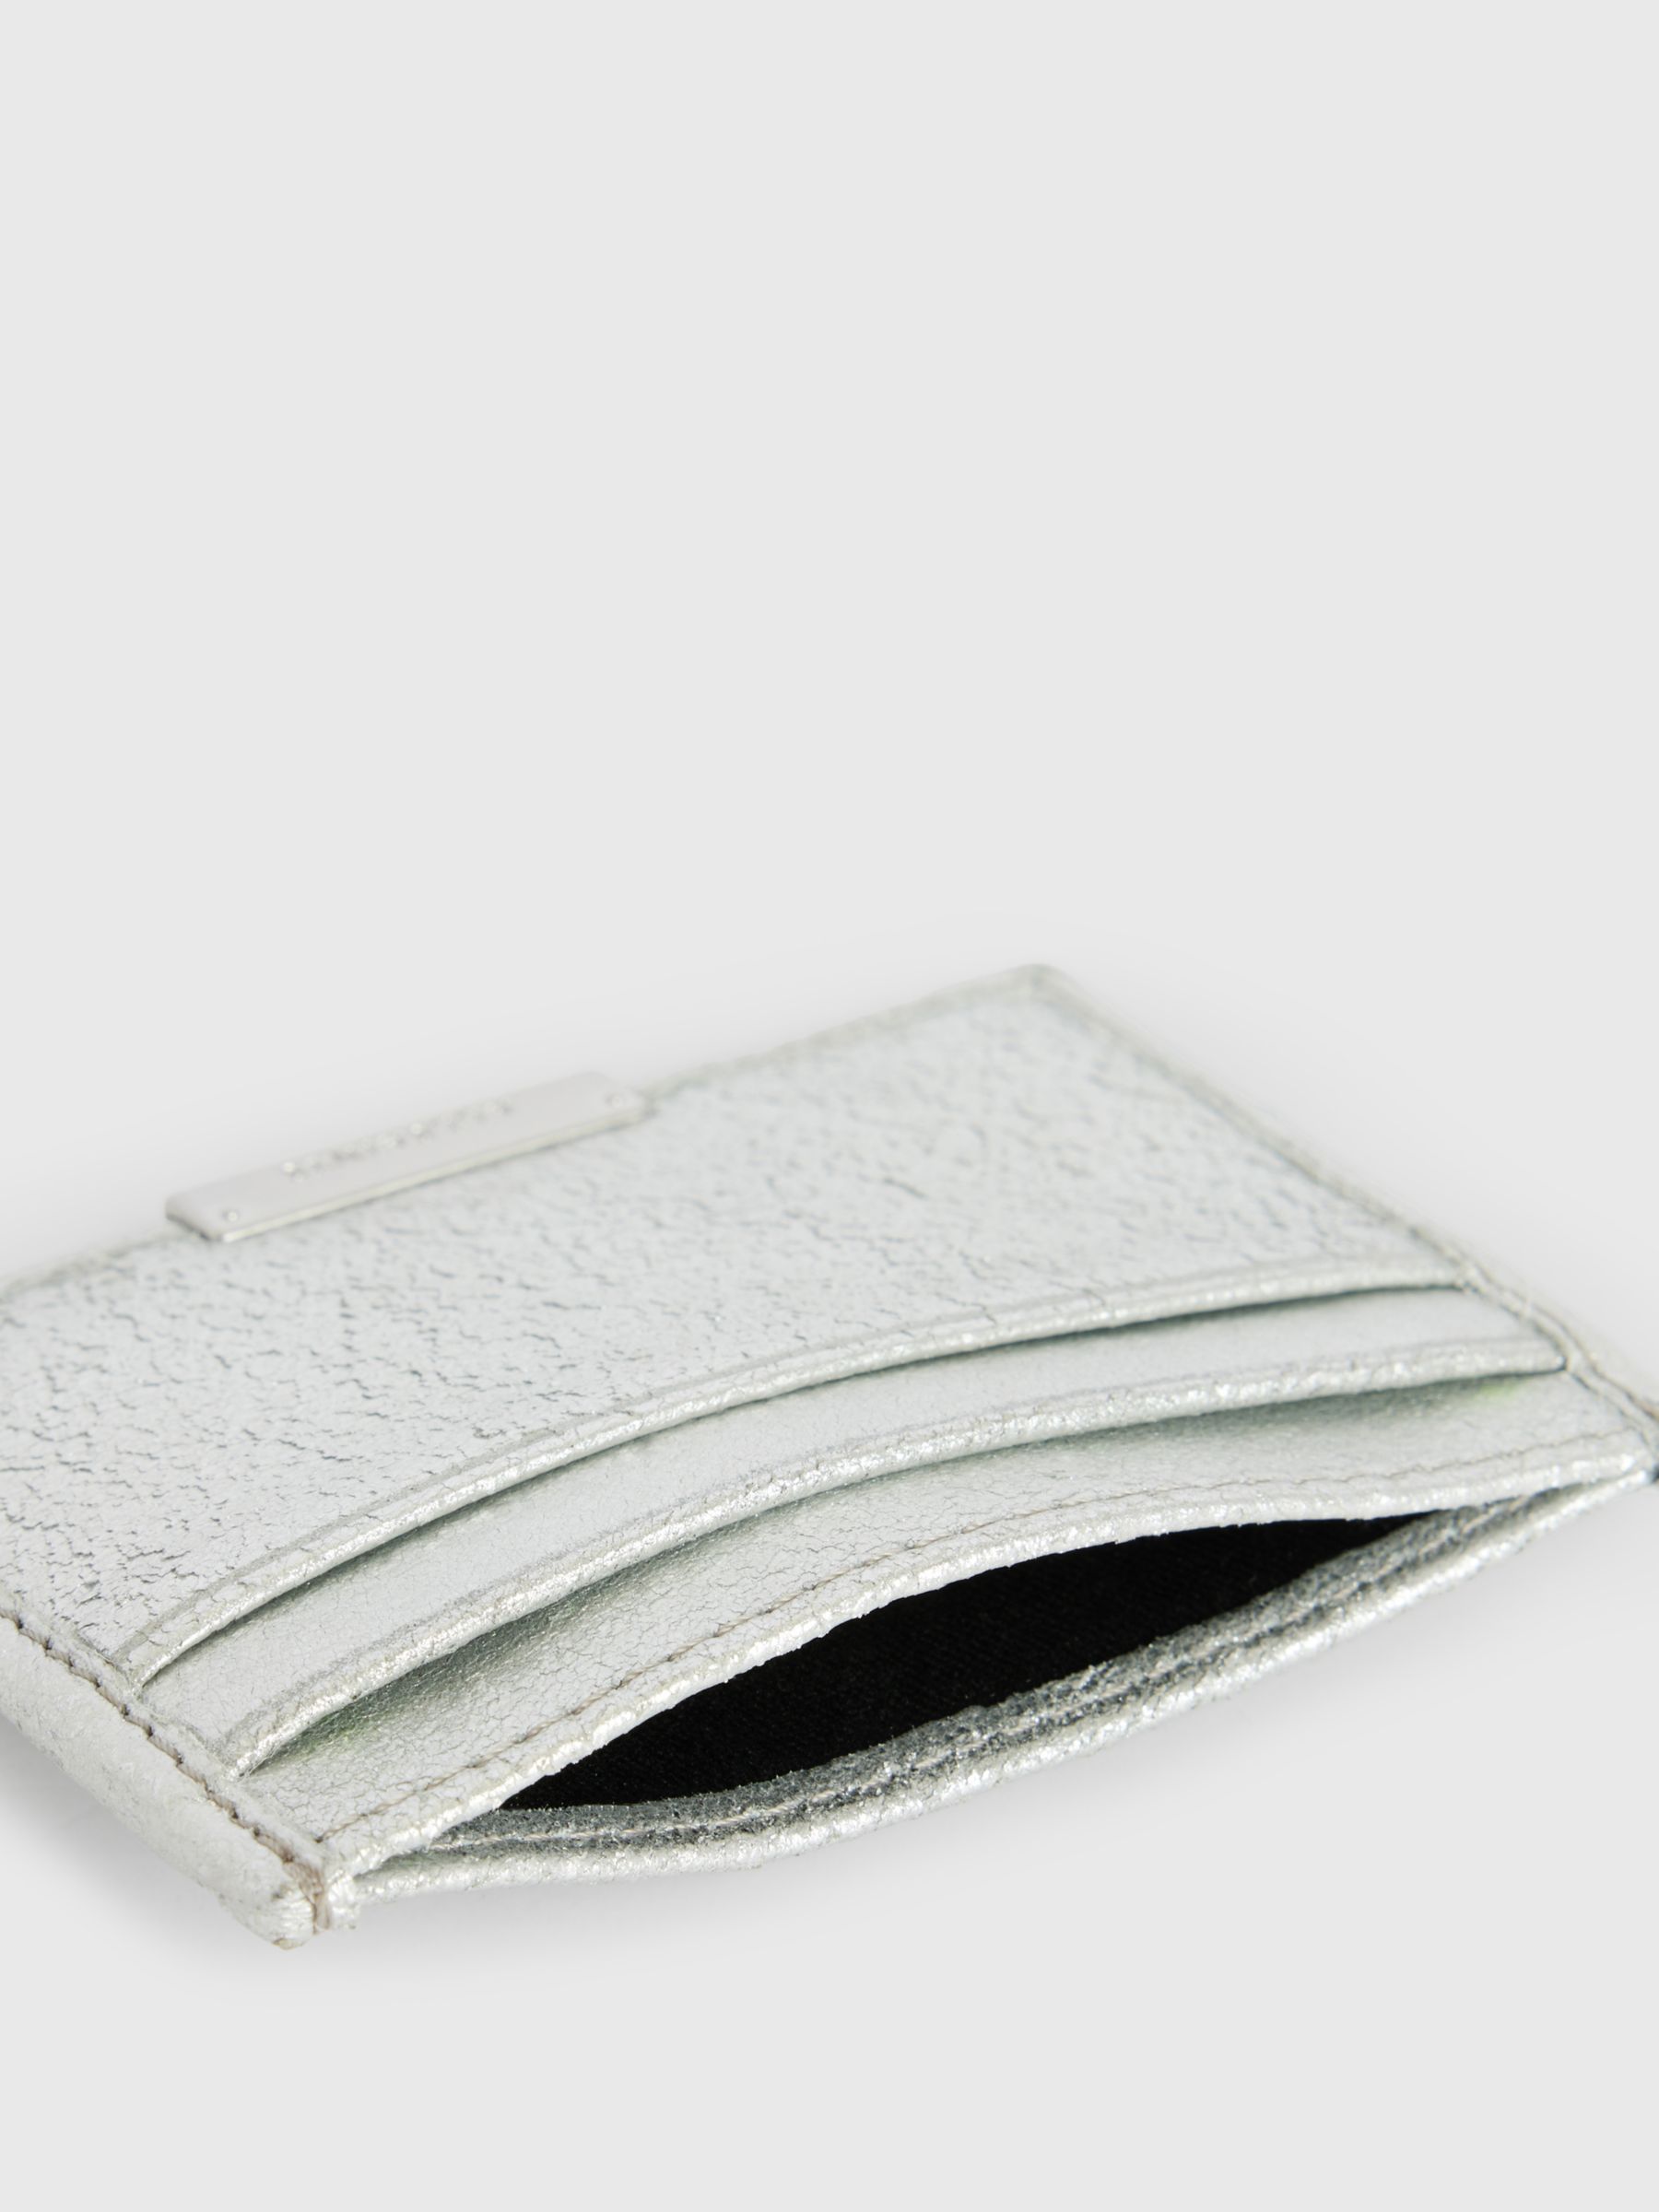 Women's Wallets And Card Holders